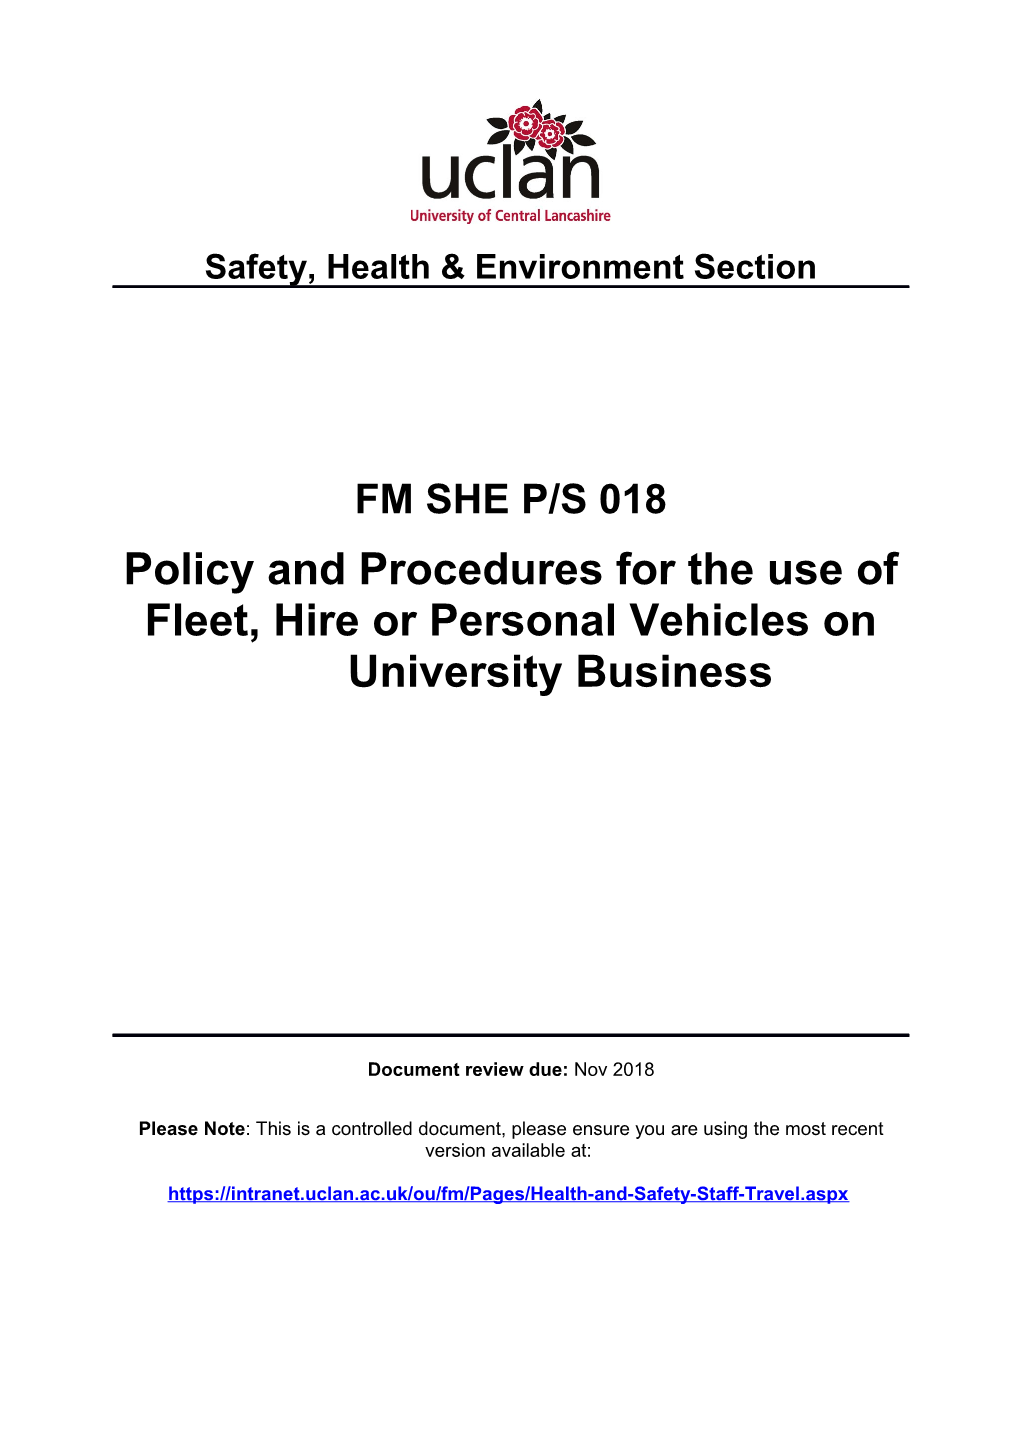 Policy and Procedures for the Use of Fleet Hire Or Personal Vehicles on University Business